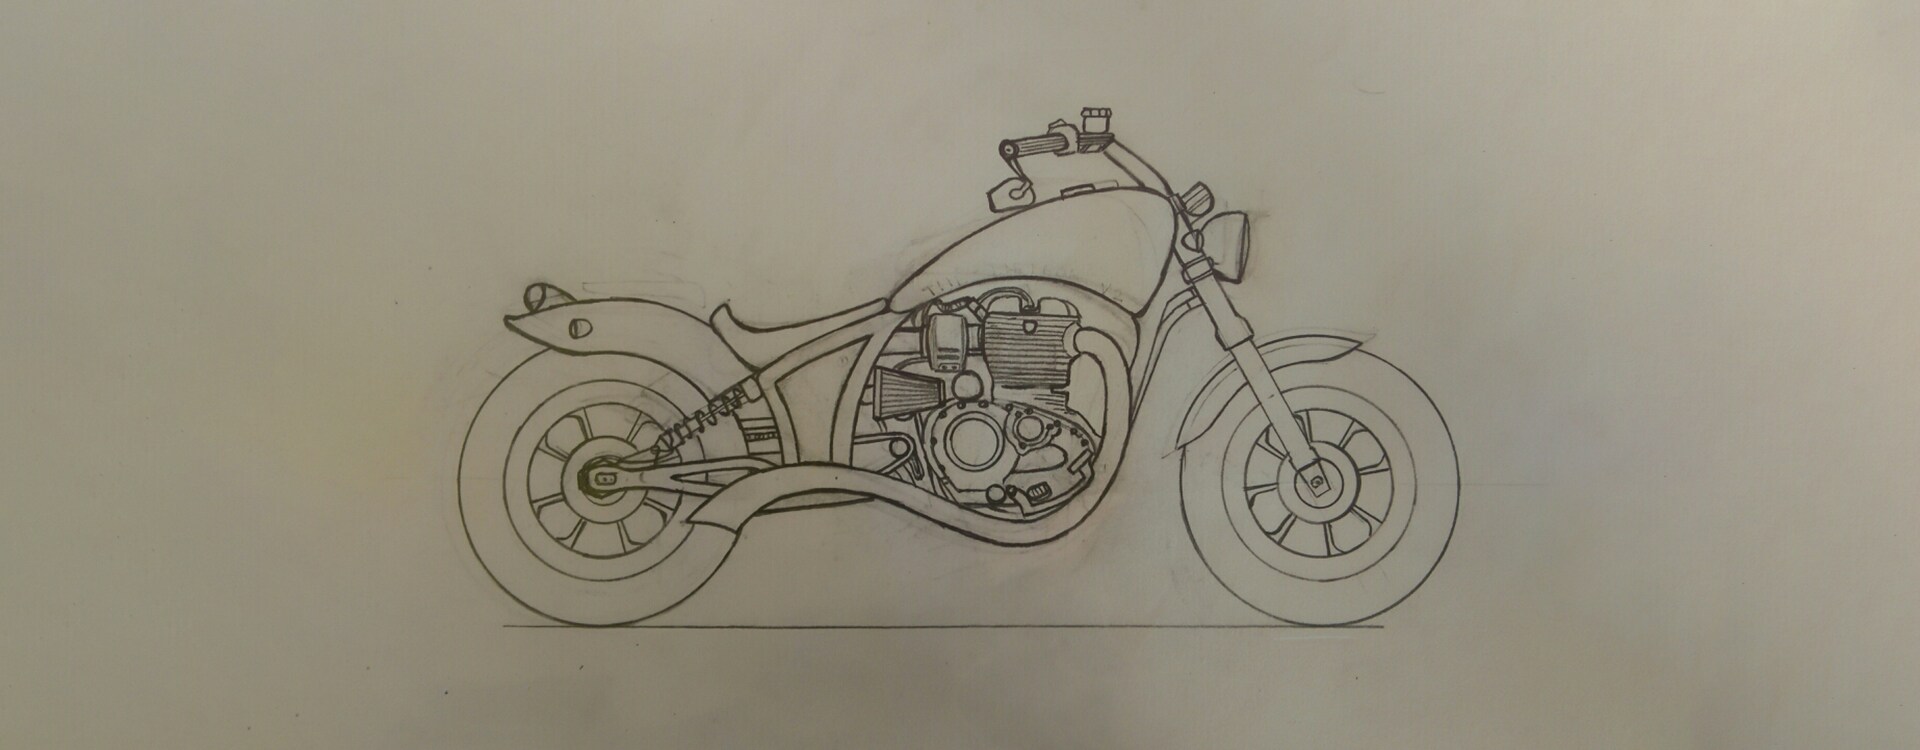 sketch of royal enfield | Royal enfield, Projects to try, Royal